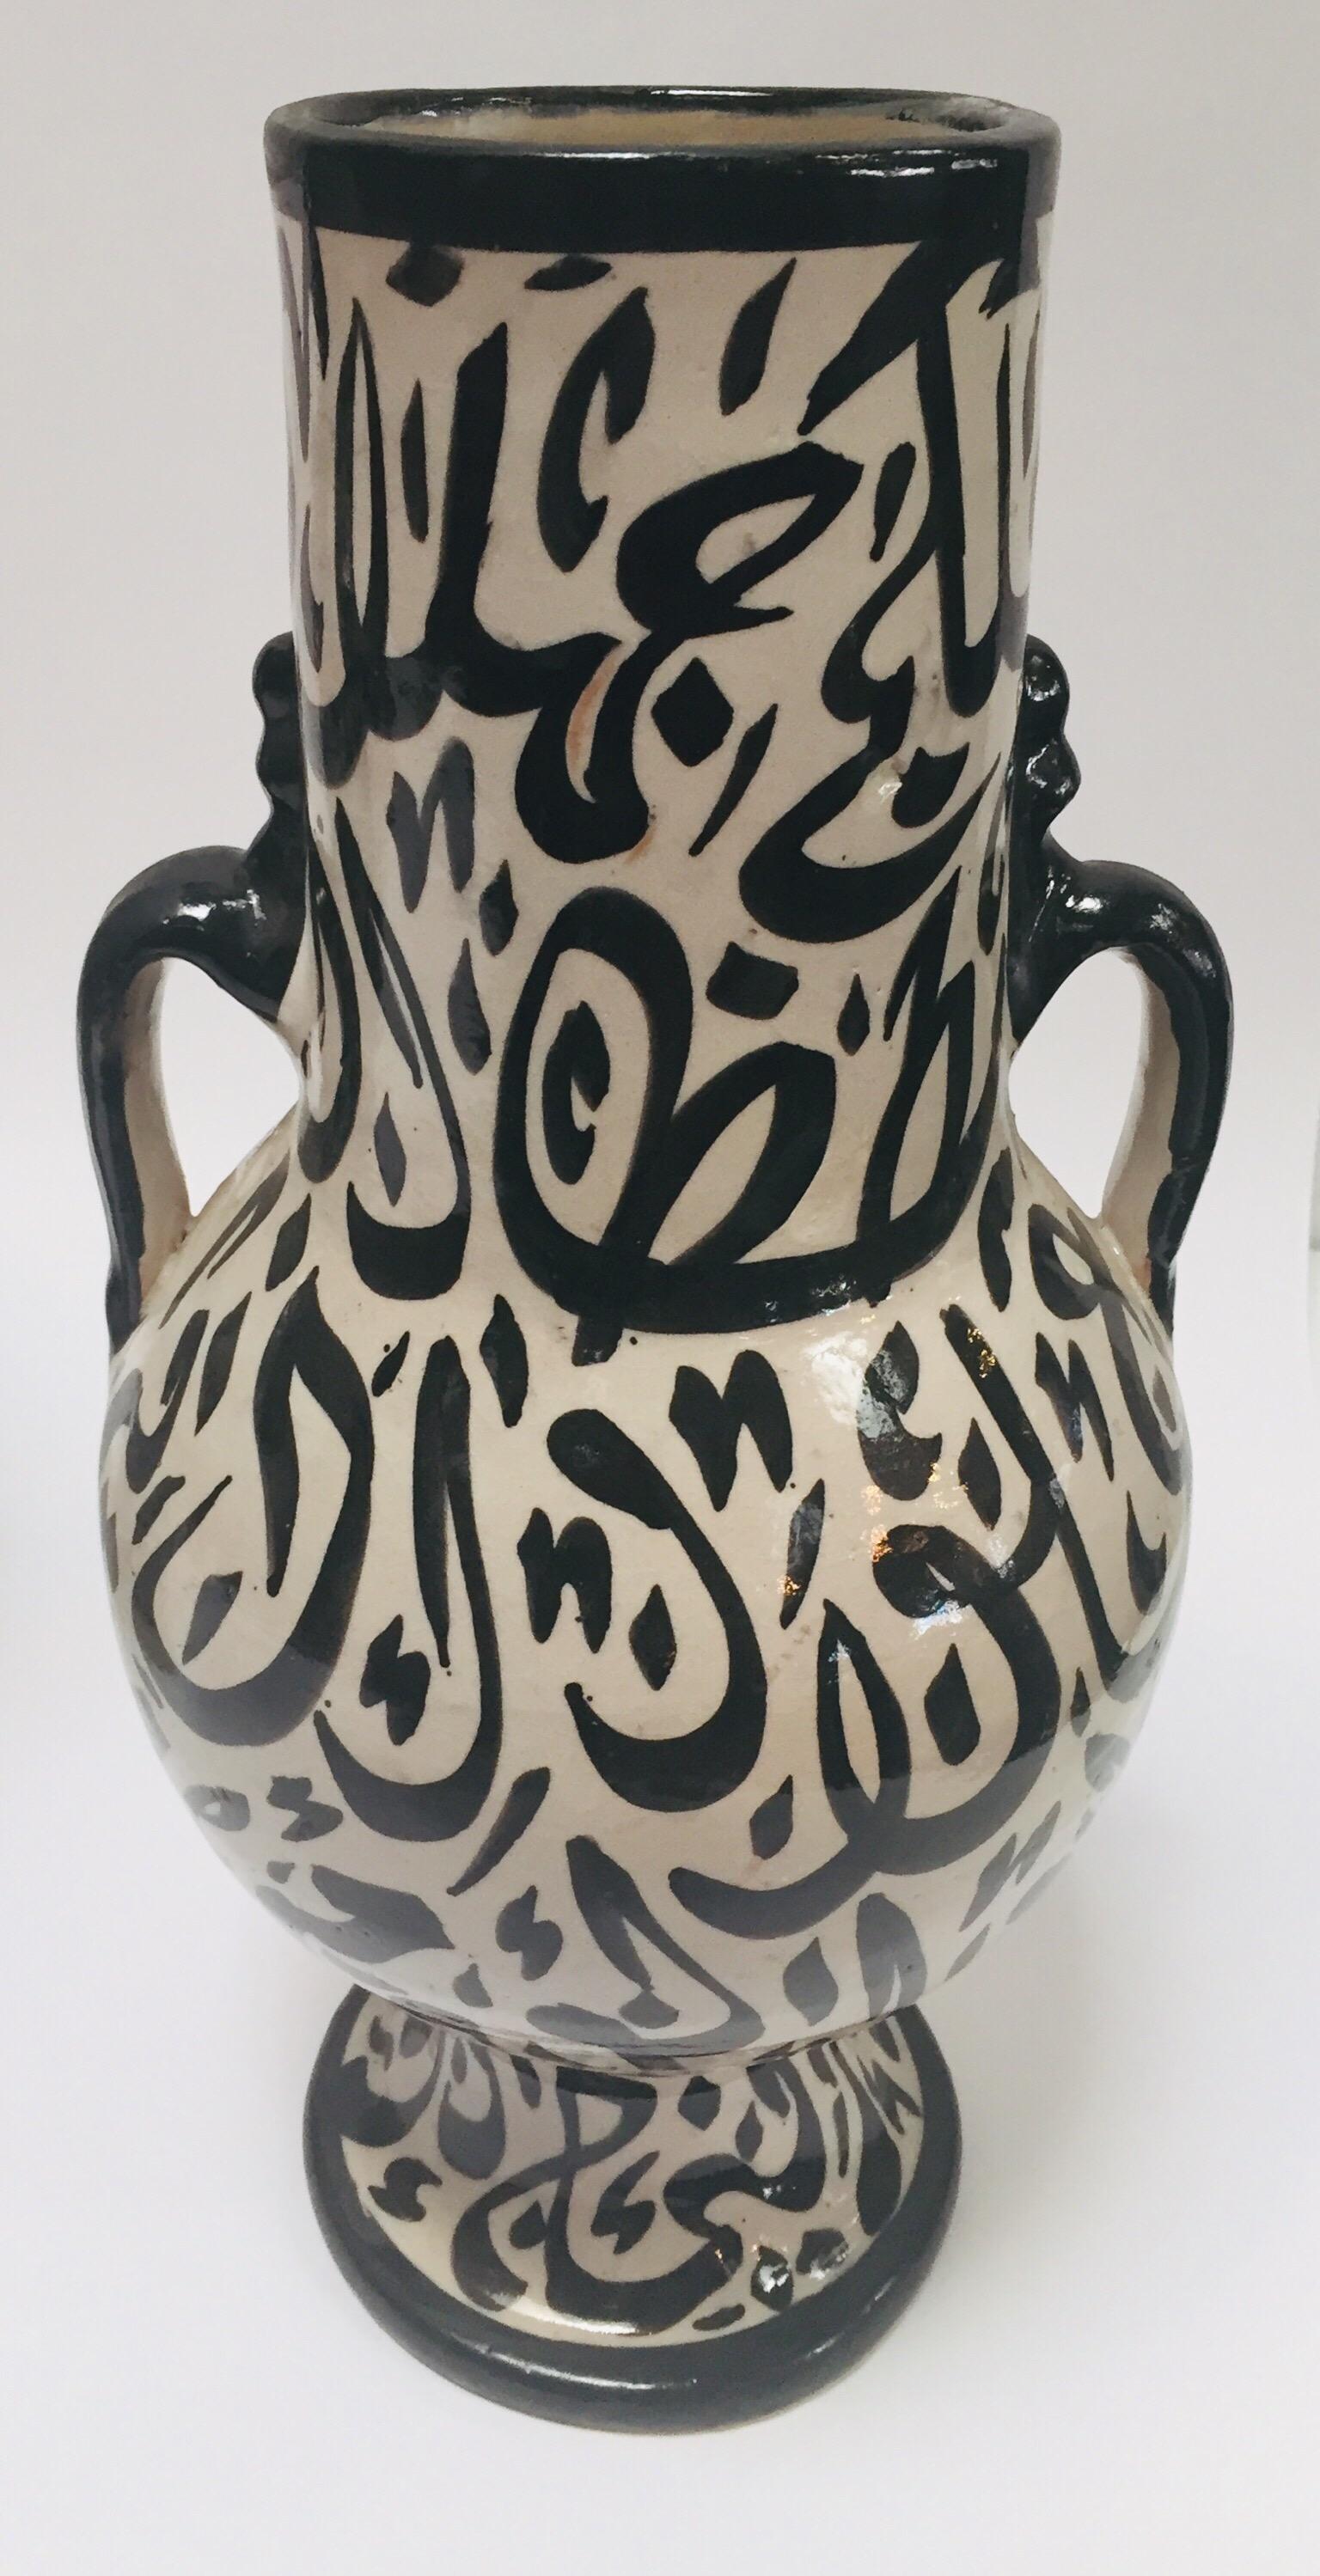 20th Century Moroccan Glazed Ceramic Vase with Arabic Calligraphy from Fez